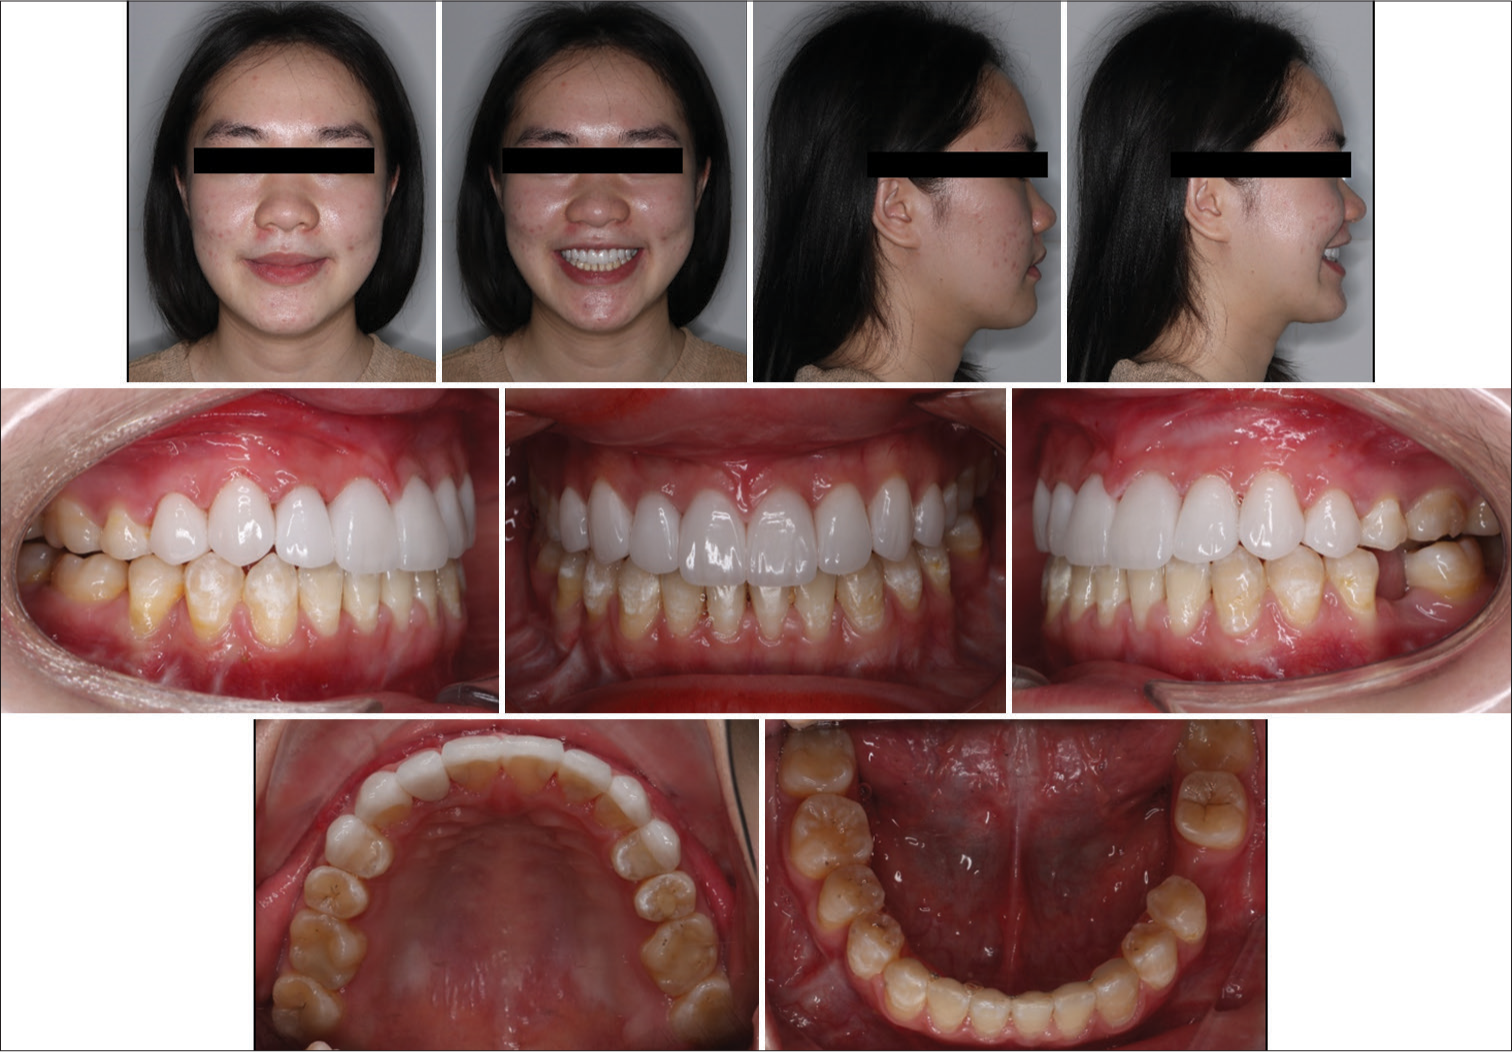 Six-month follow-up photographs. Upper anterior teeth were restored with porcelain laminate veneer.